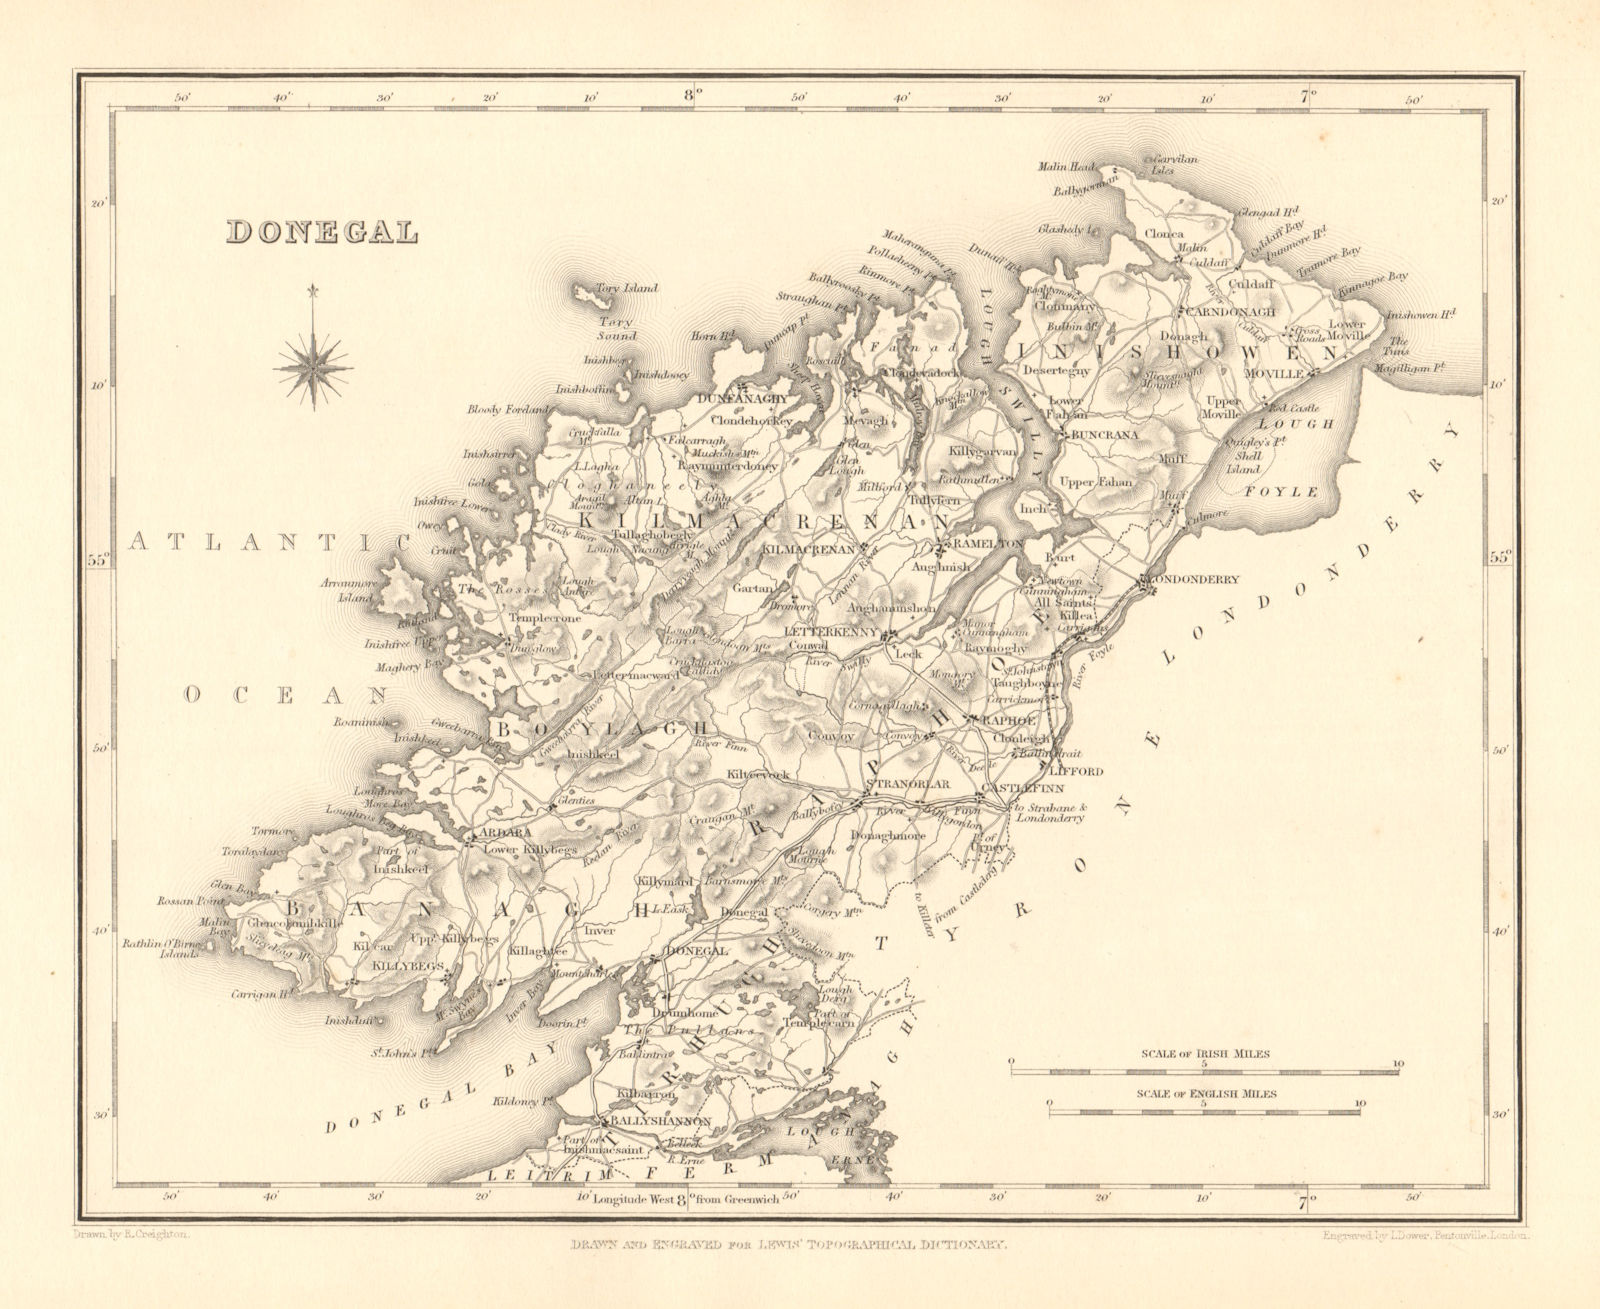 COUNTY DONEGAL antique map for LEWIS by CREIGHTON & DOWER - Ireland 1846